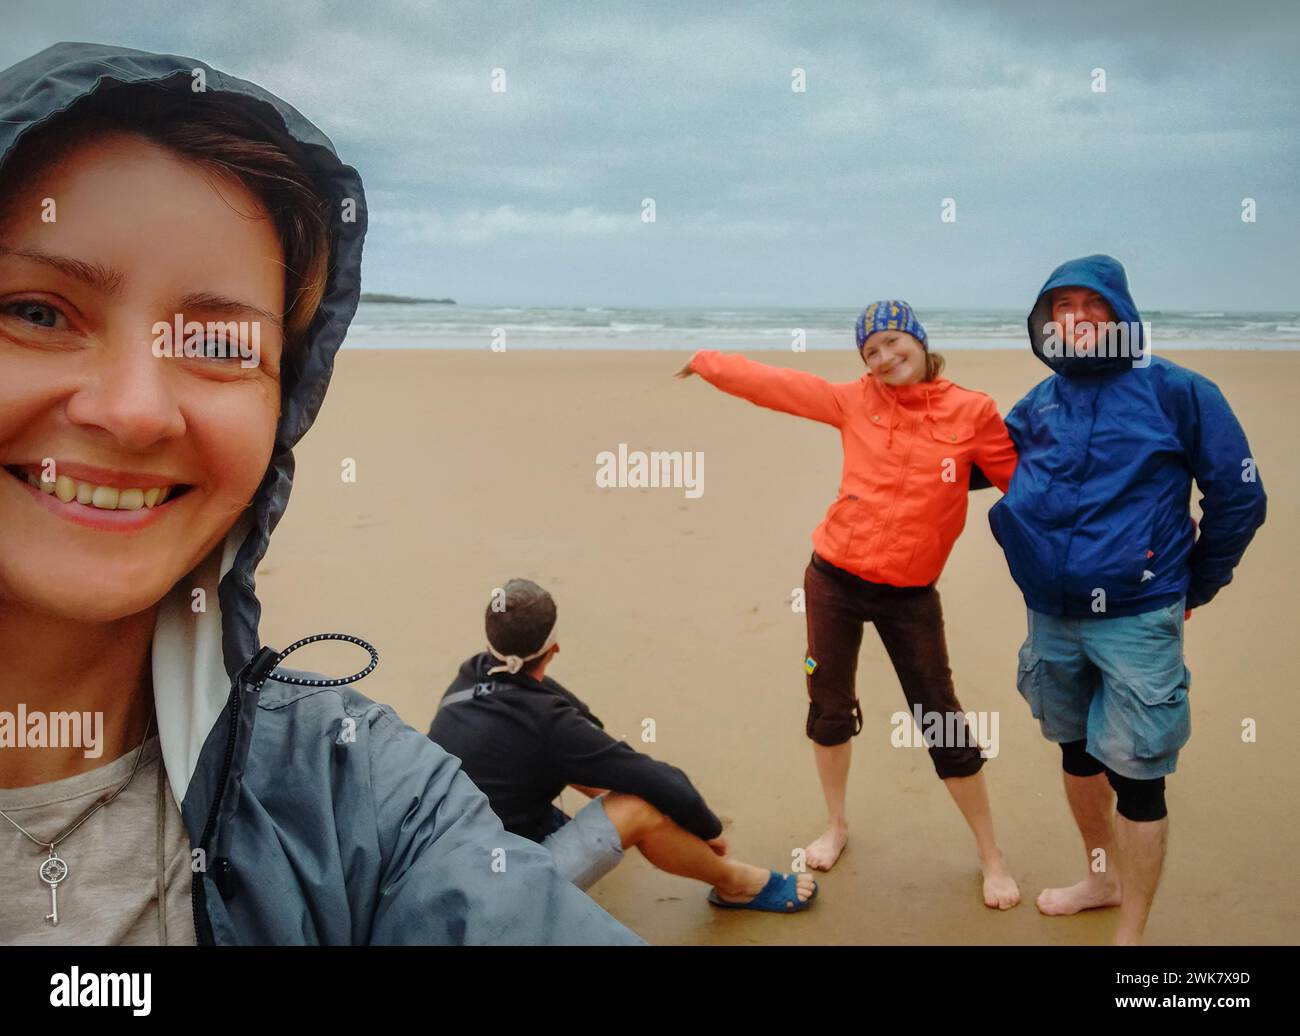 Four happy people on the beach. Pilgrims on Camino de Santiago. Family time. Tourists on coast. Amazing moment together. Friendship time. Stock Photo